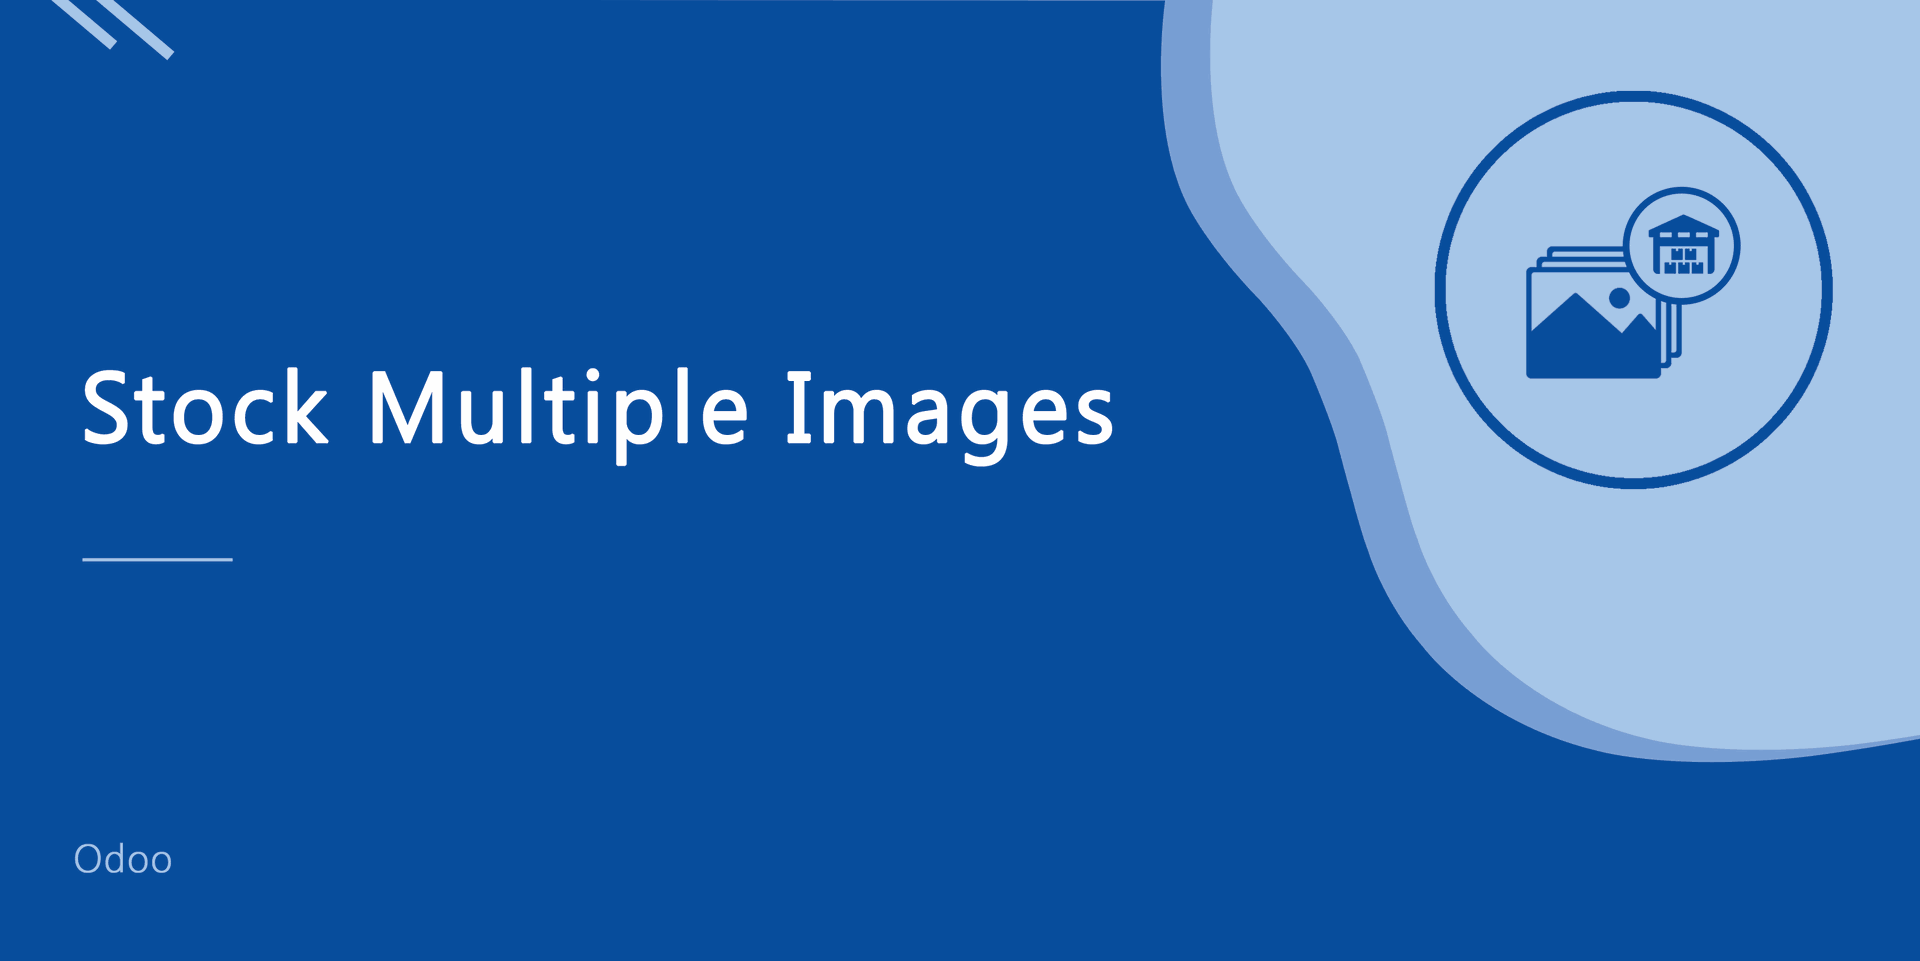 Stock Multiple Images